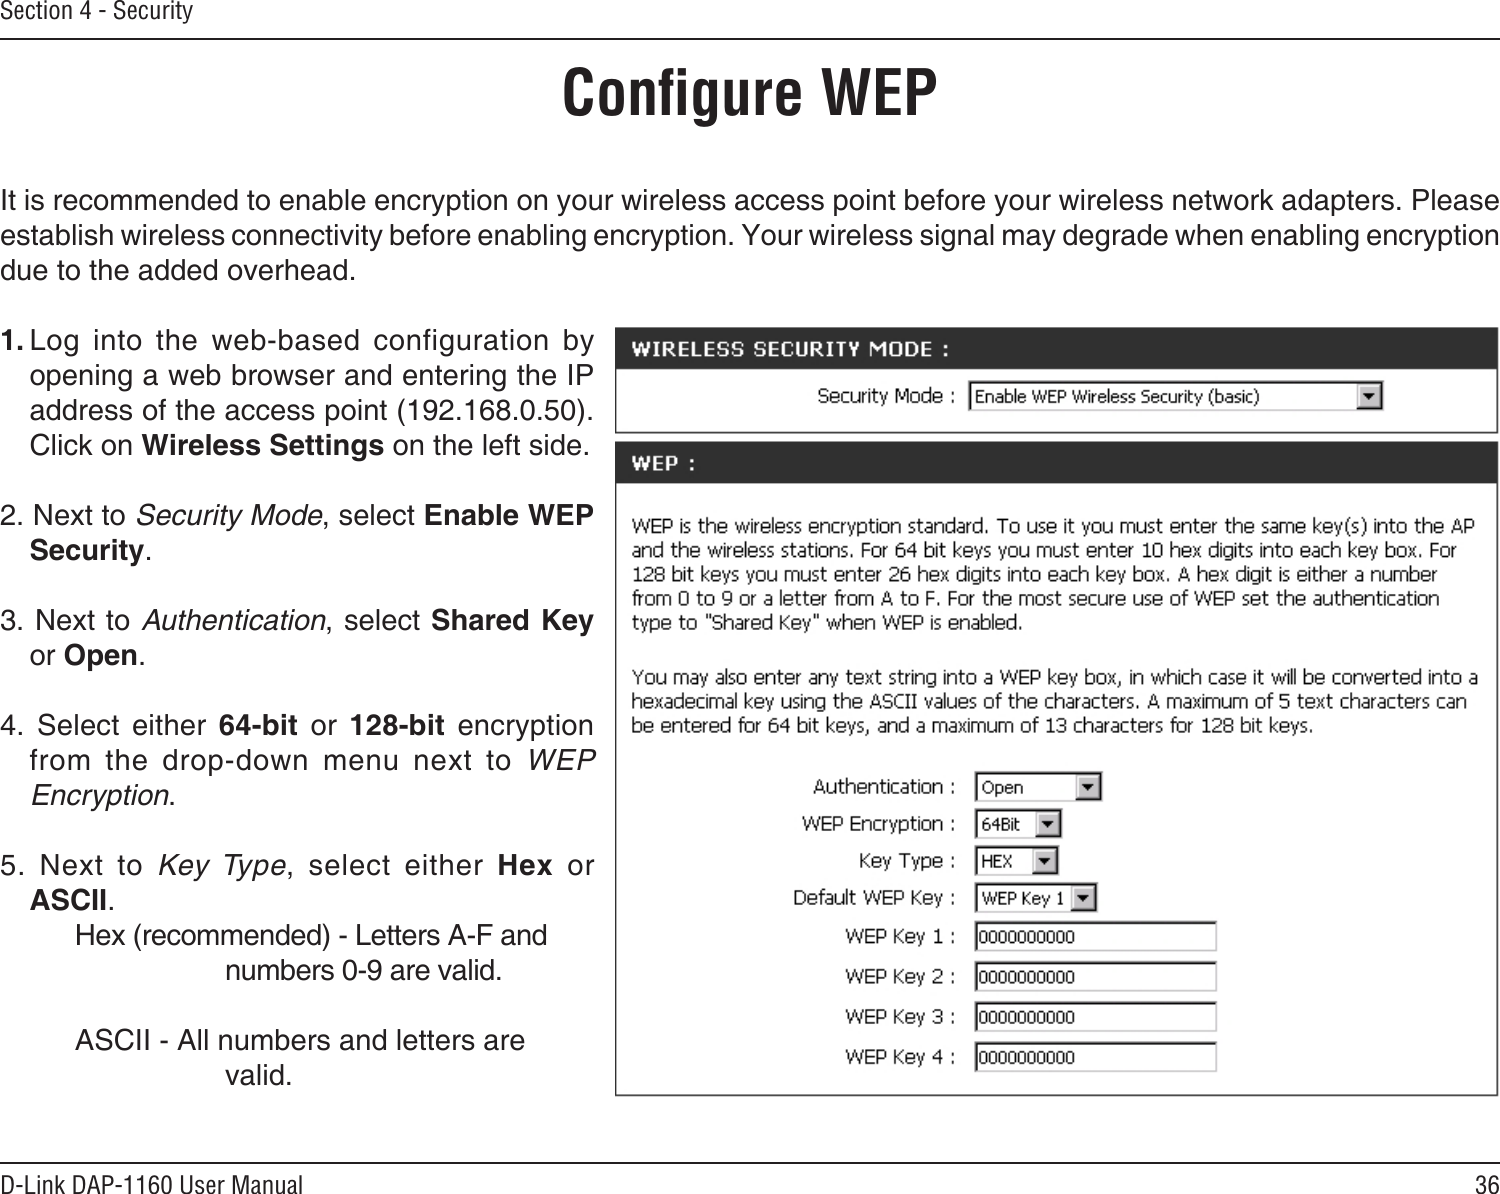 36D-Link DAP-1160 User ManualSection 4 - SecurityConﬁgure WEPIt is recommended to enable encryption on your wireless access point before your wireless network adapters. Please establish wireless connectivity before enabling encryption. Your wireless signal may degrade when enabling encryption due to the added overhead.1. Log  into  the  web-based  configuration  by opening a web browser and entering the IP address of the access point (192.168.0.50).  Click on Wireless Settings on the left side.2. Next to Security Mode, select Enable WEP Security.3. Next to Authentication, select Shared Key or Open.4.  Select  either  64-bit  or  128-bit  encryption from  the  drop-down  menu  next  to  WEP Encryption. 5.  Next  to  Key  Type,  select  either  Hex  or ASCII.    Hex (recommended) - Letters A-F and        numbers 0-9 are valid.    ASCII - All numbers and letters are        valid.